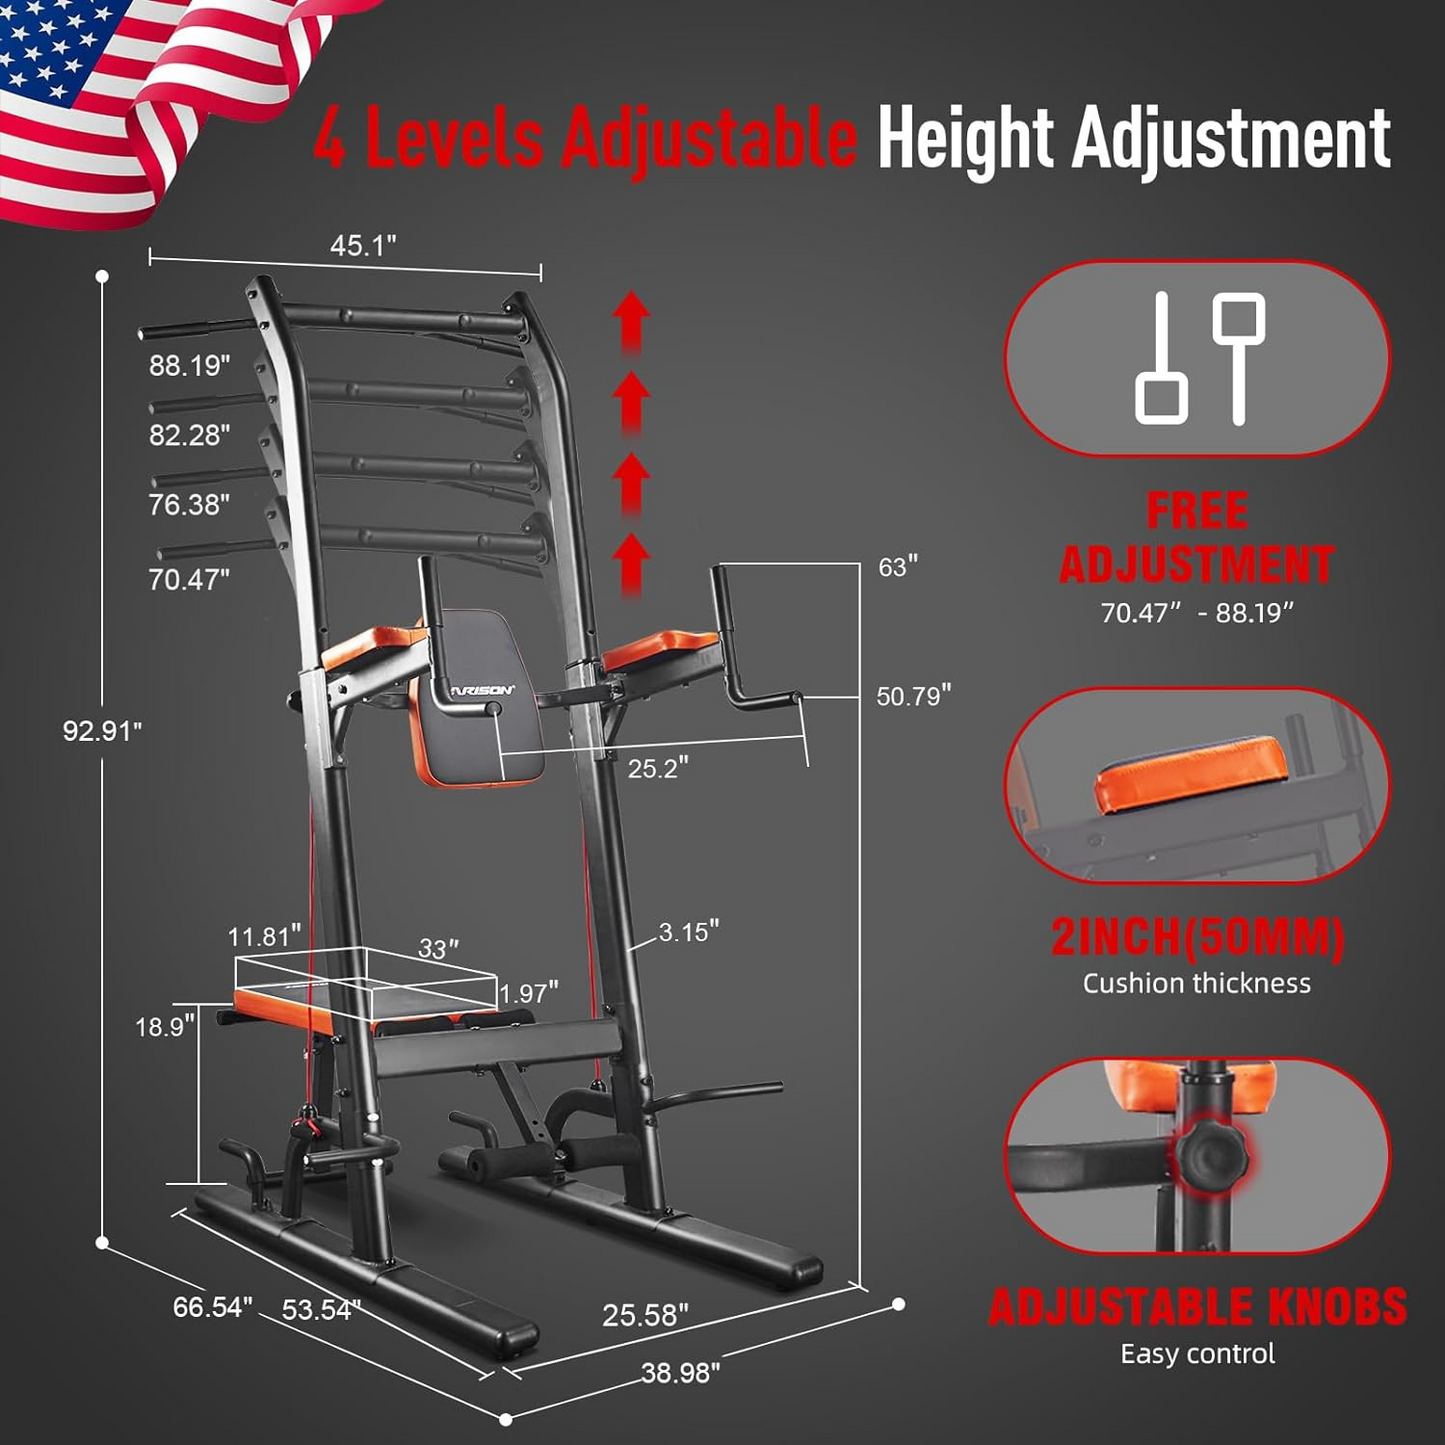 Harison HR-408 VKR Power Tower with Foldable Bench